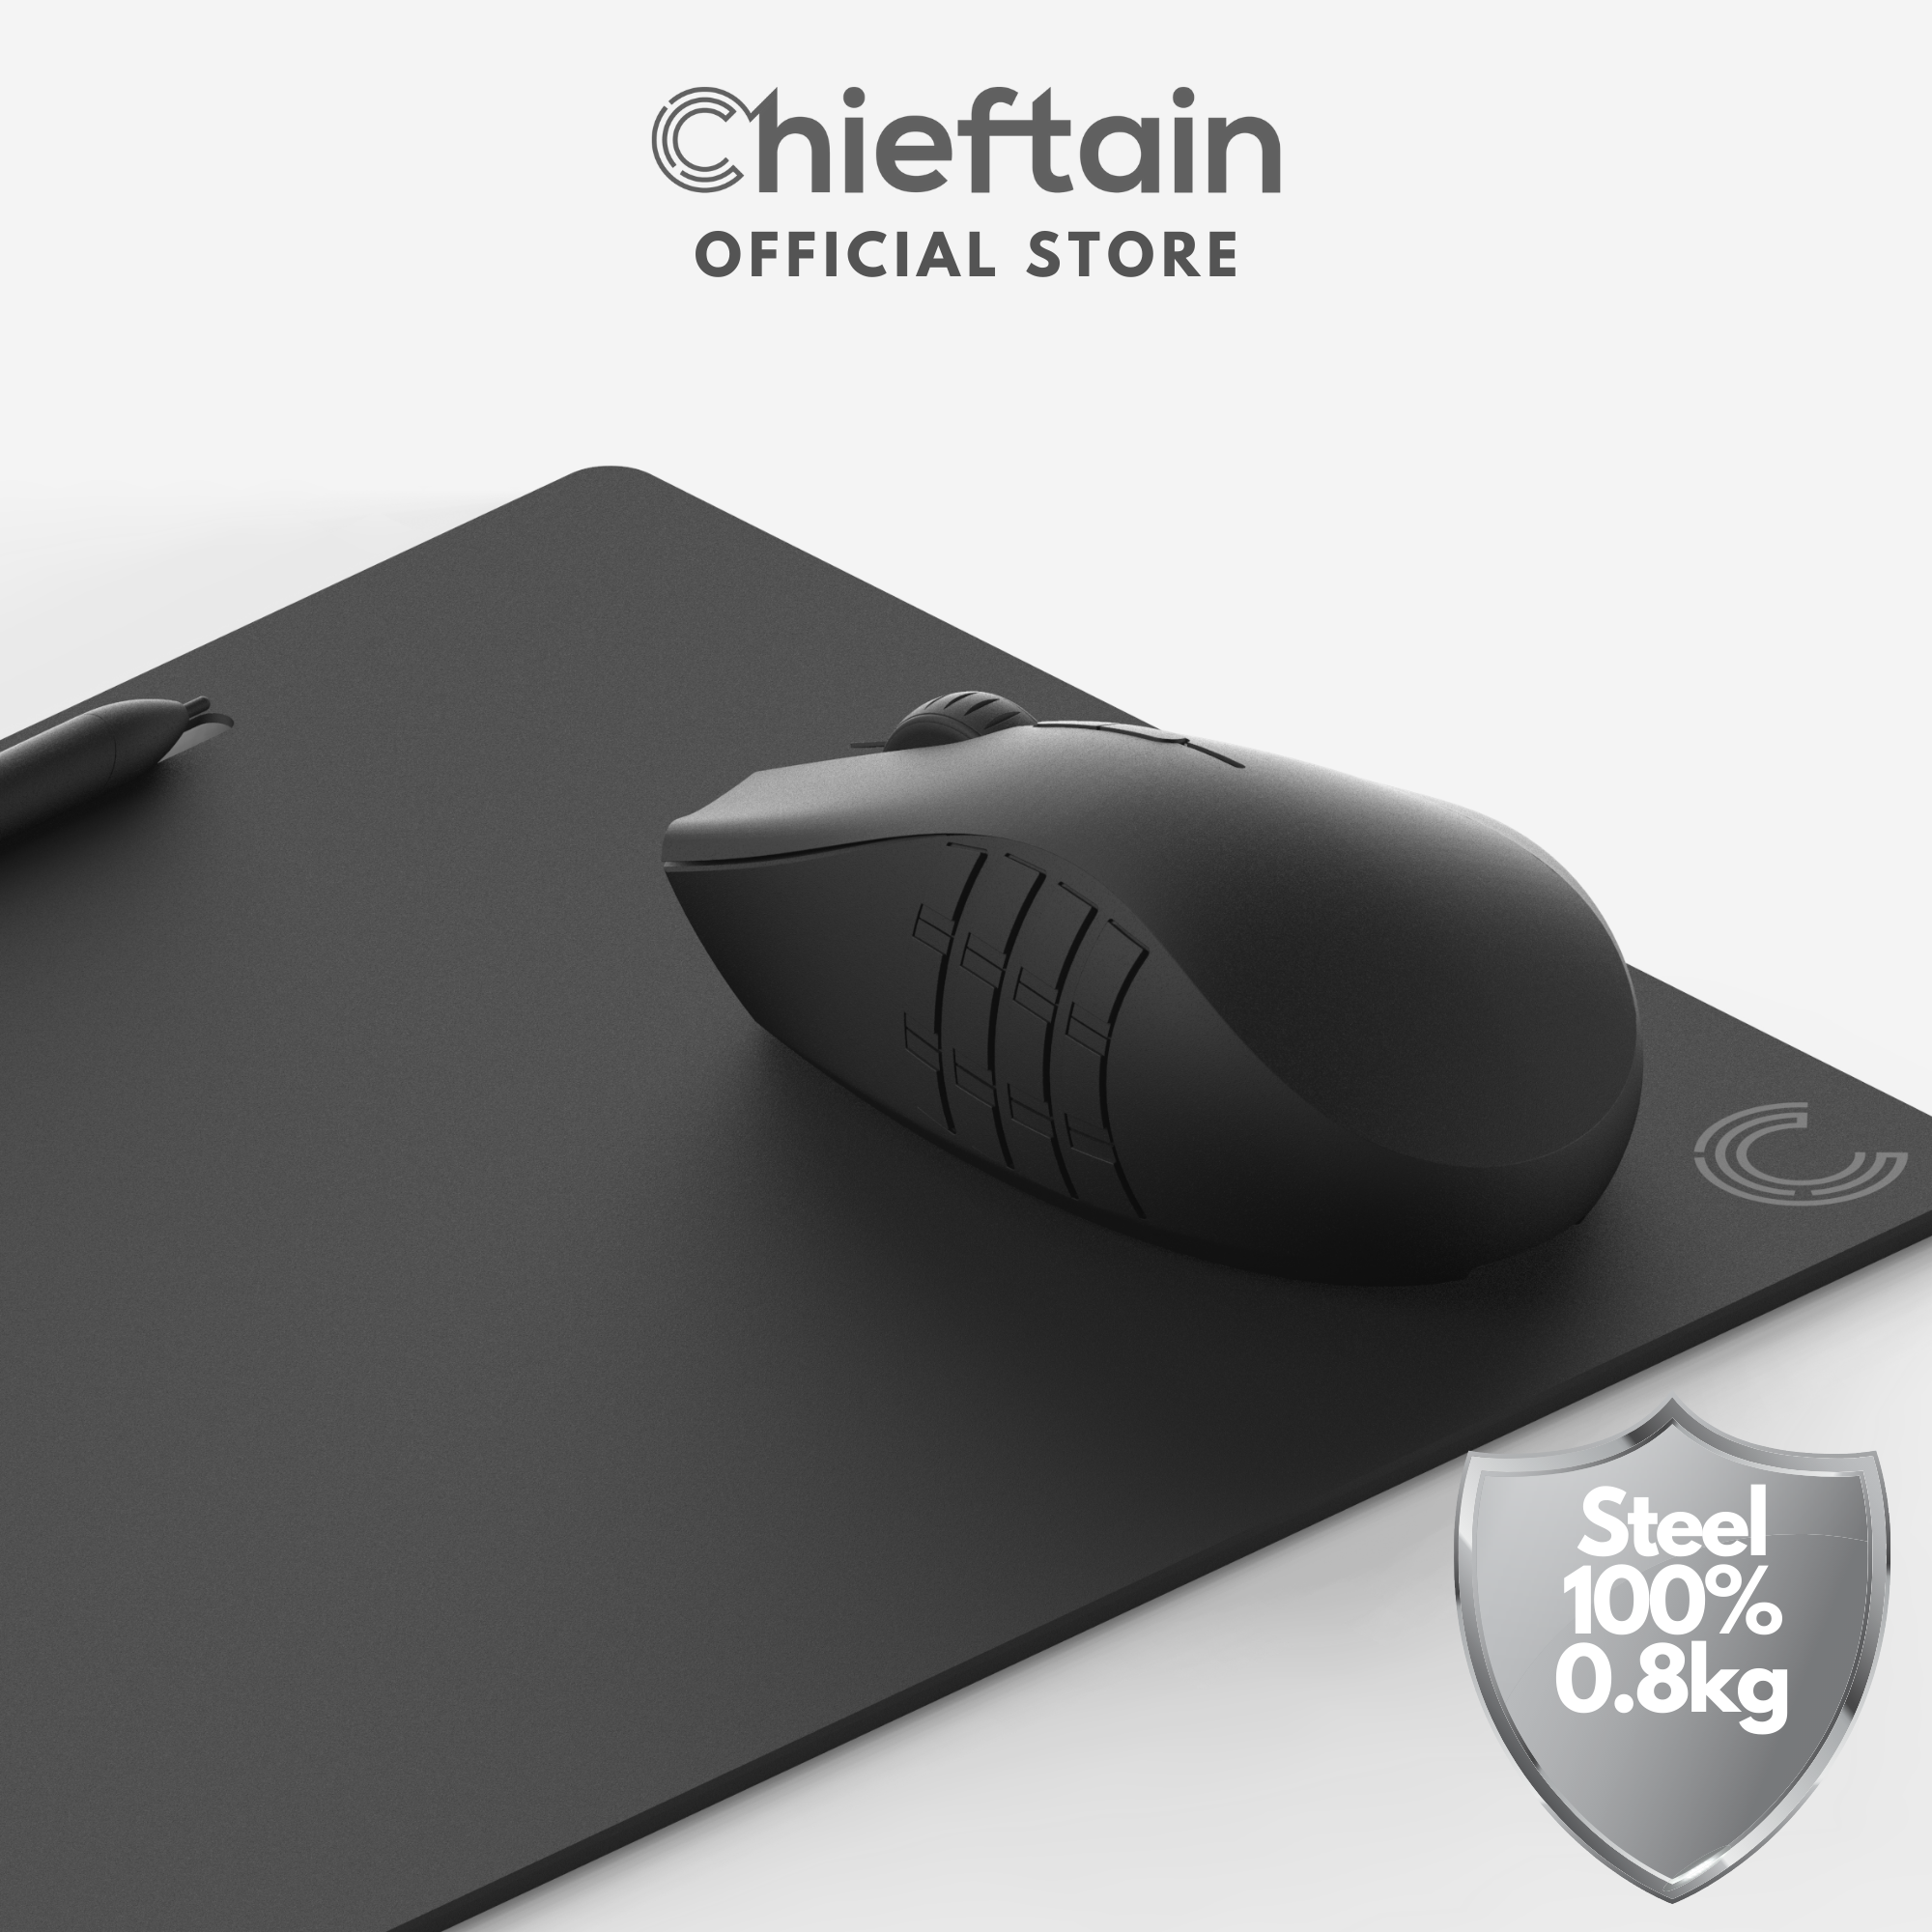 Chieftain Premium Steel Surface Mouse Pad 220x280x4mm